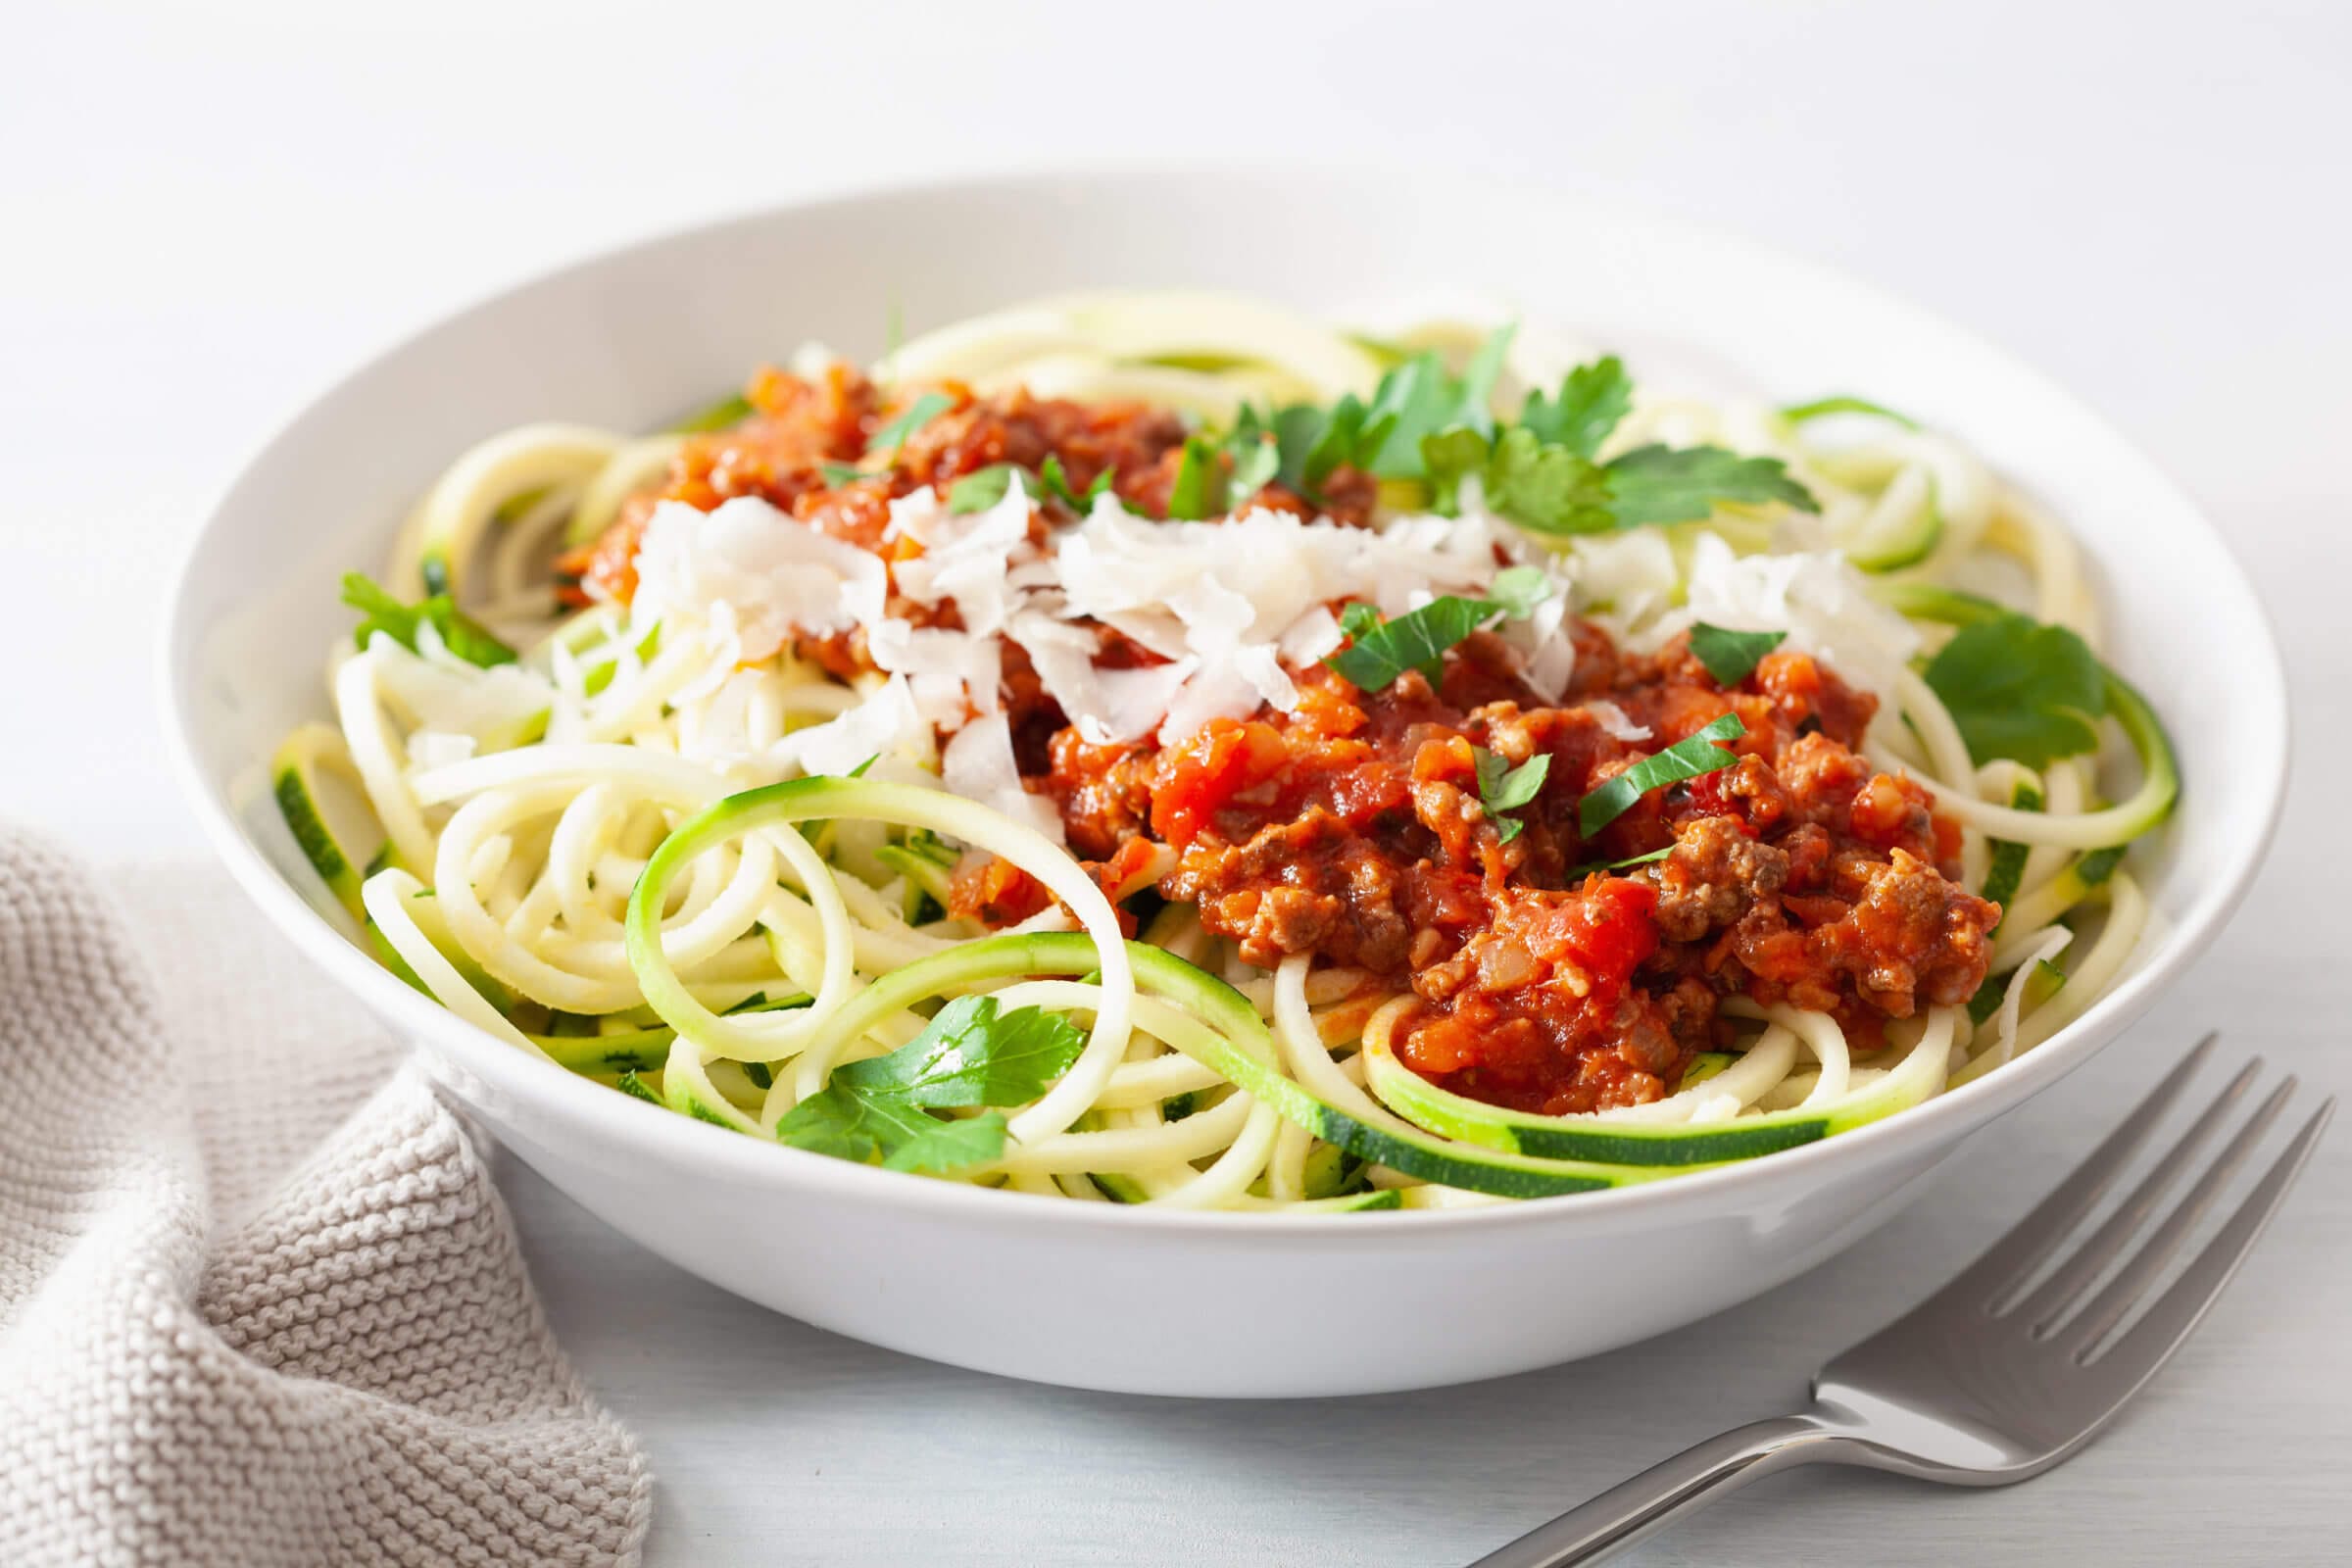 Keto paleo zoodles bolognese: zucchini noodles with meat sauce and parmesan 